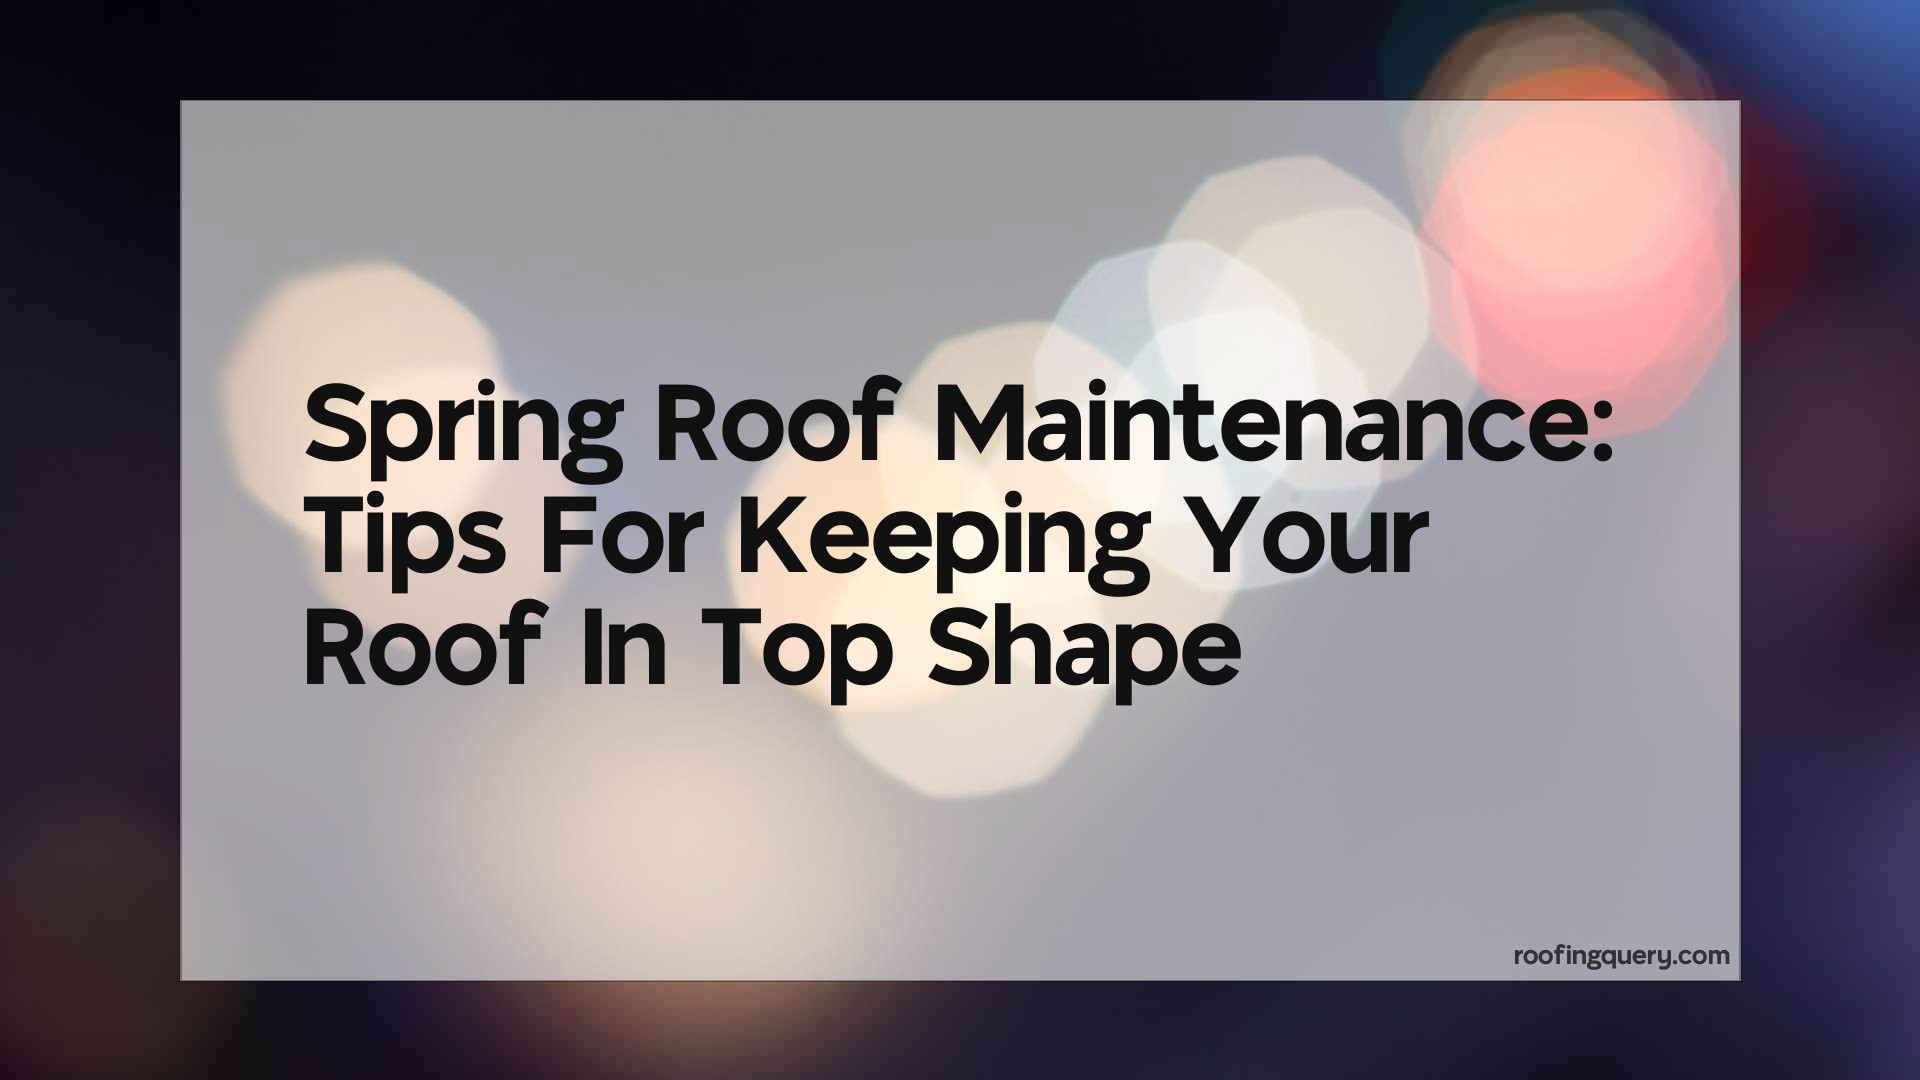 Spring Roof Maintenance: Tips For Keeping Your Roof In Top Shape